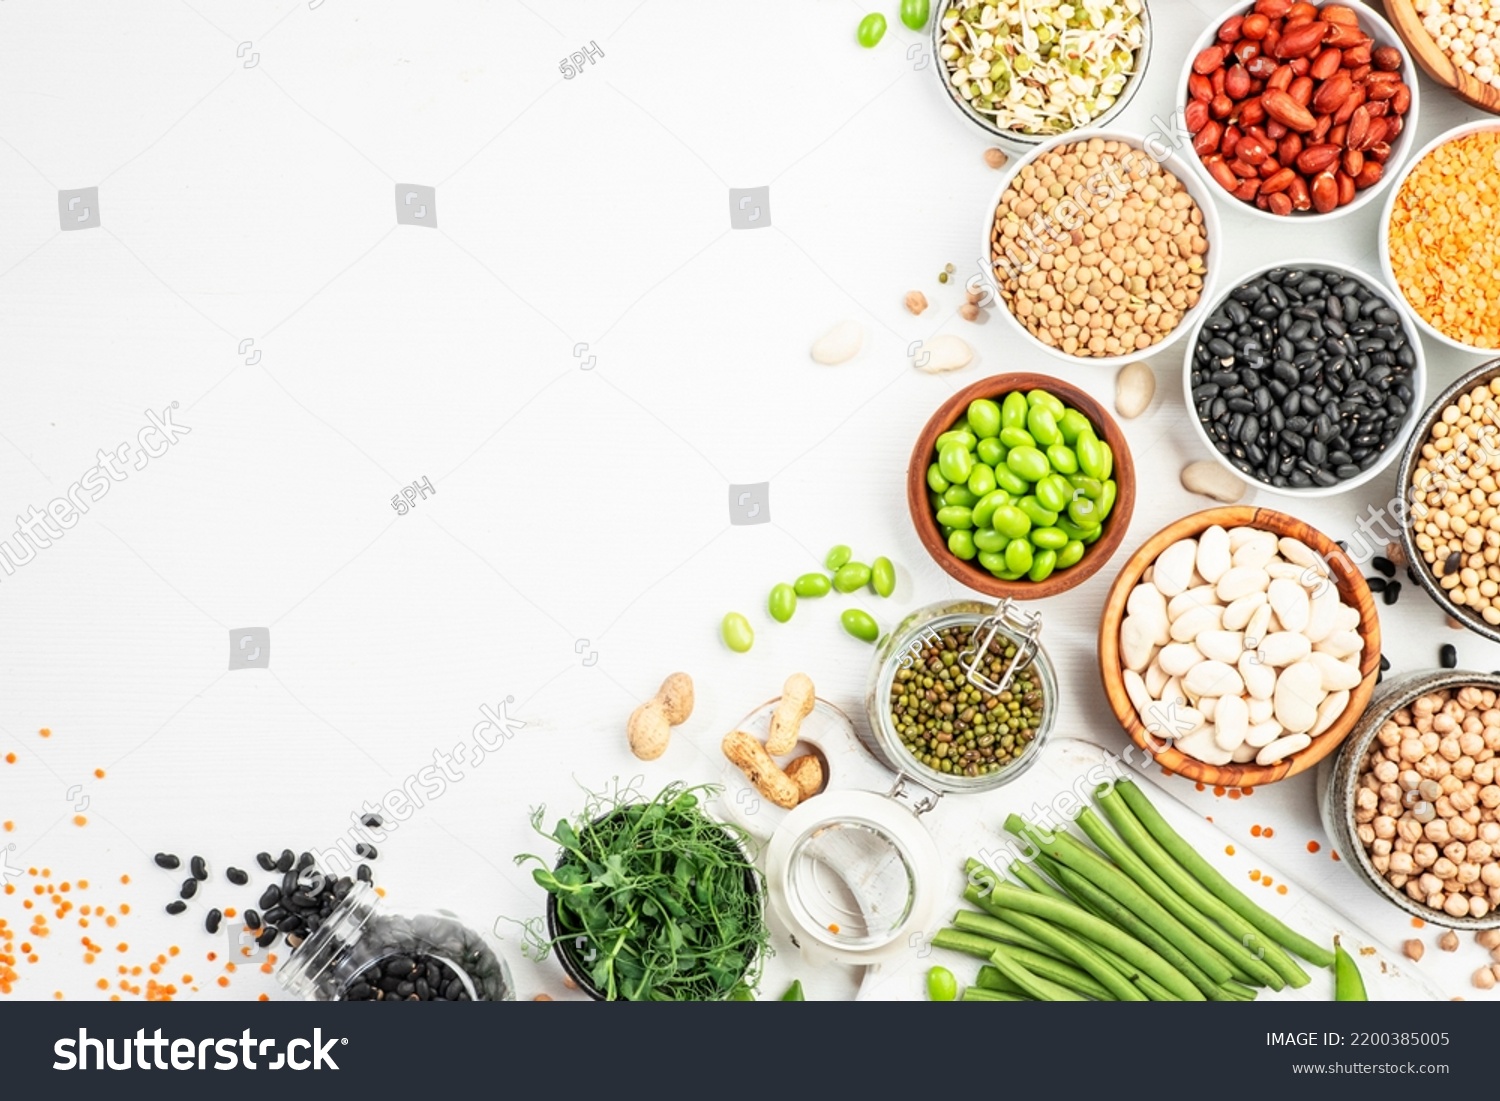 Beans, legumes and green sprouts. Dried, raw and fresh, top view. Red beans, lentils, chickpeas, soybeans. Healthy, nutritious, diet food, vegan protein, micronutrients and fiber sources #2200385005